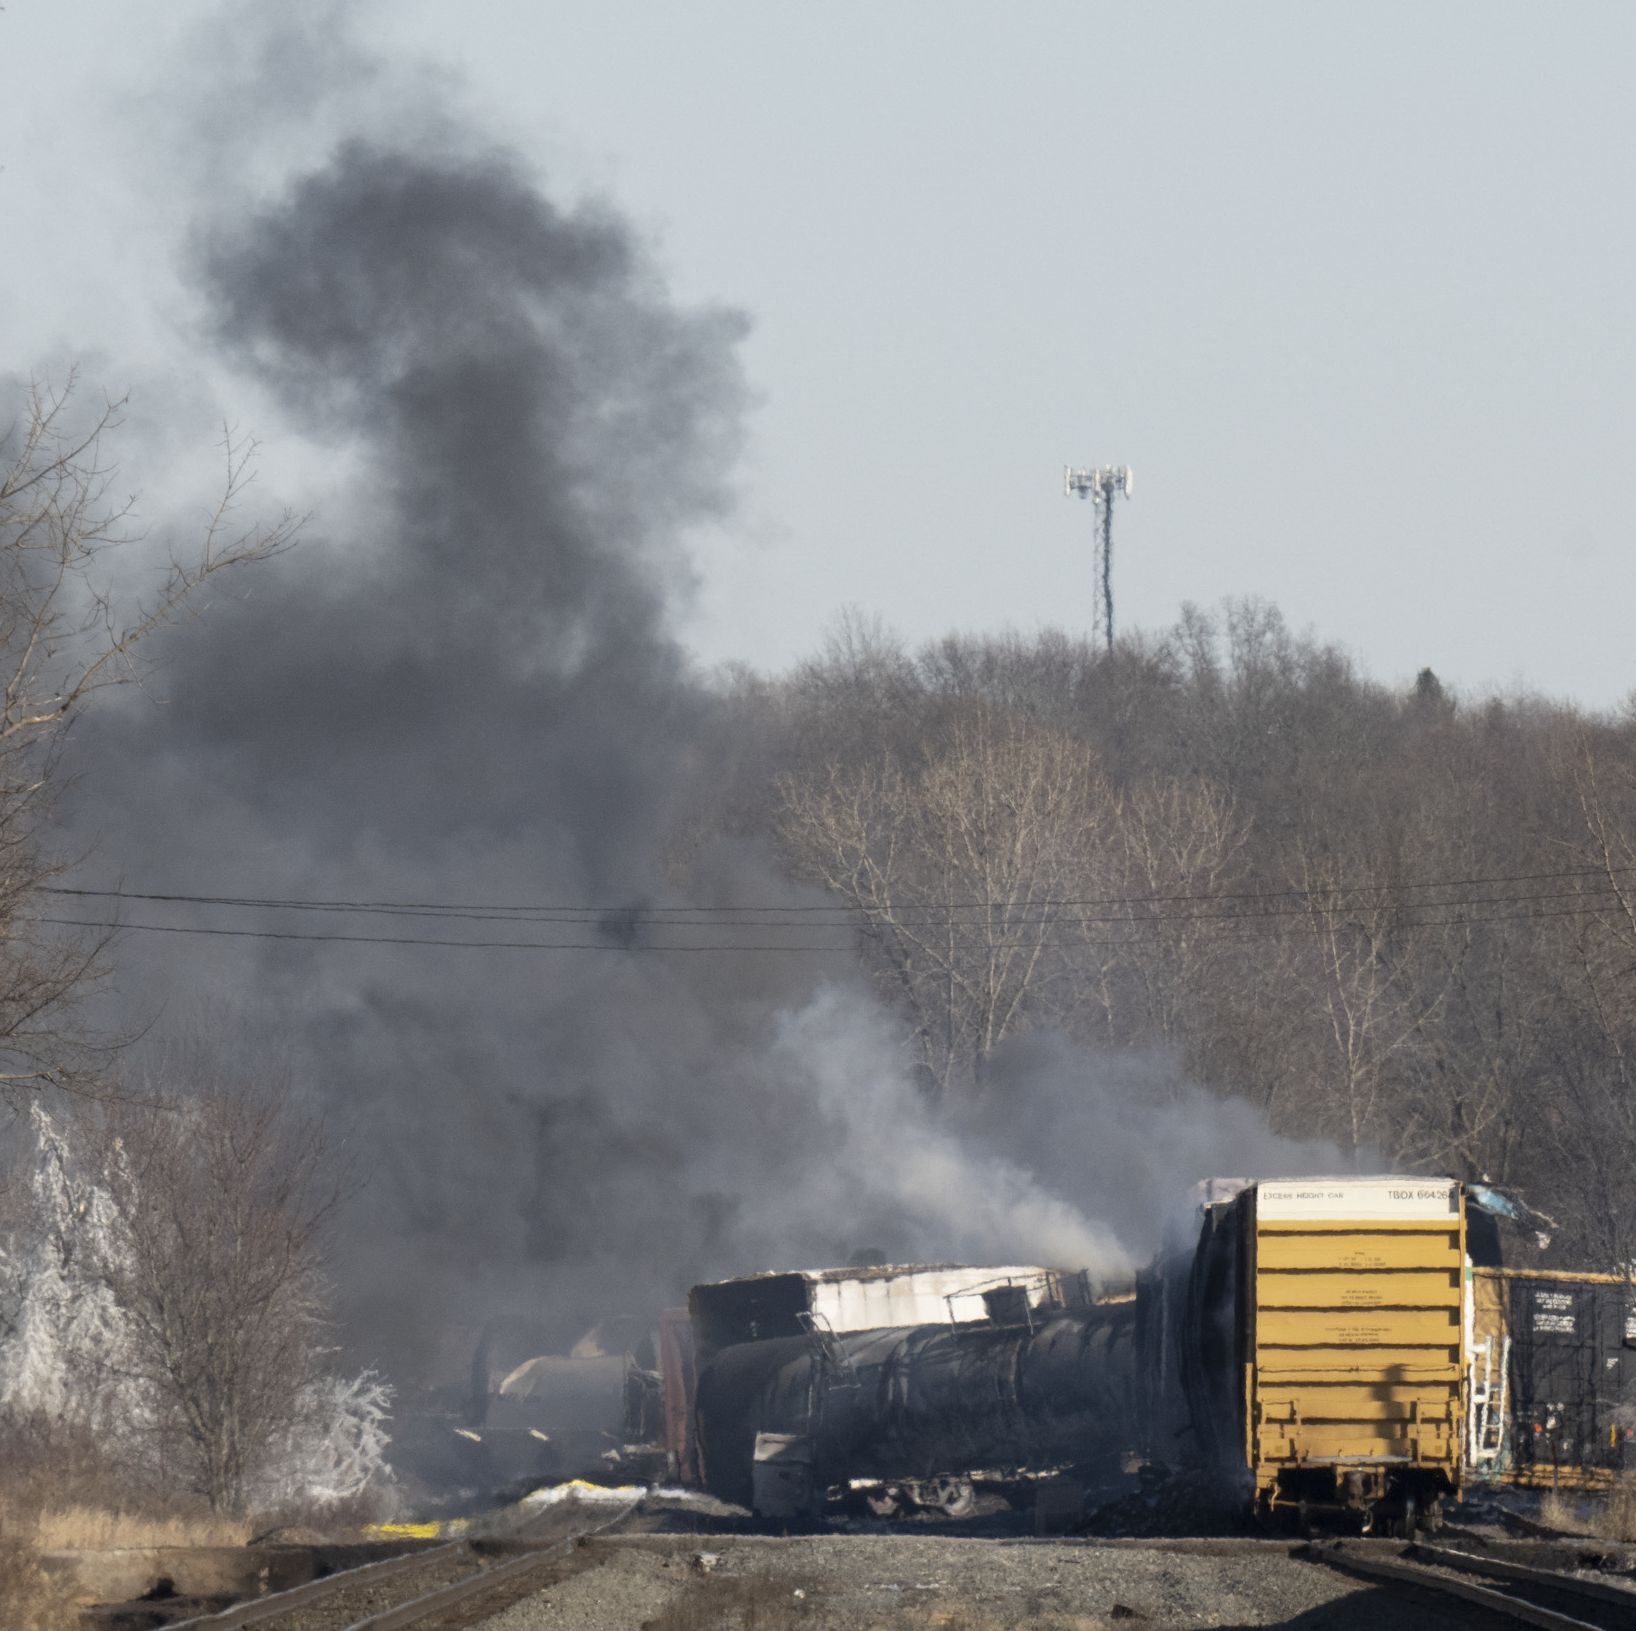 The Toxic Chemicals Released in the Ohio Train Derailment Are Horrifying